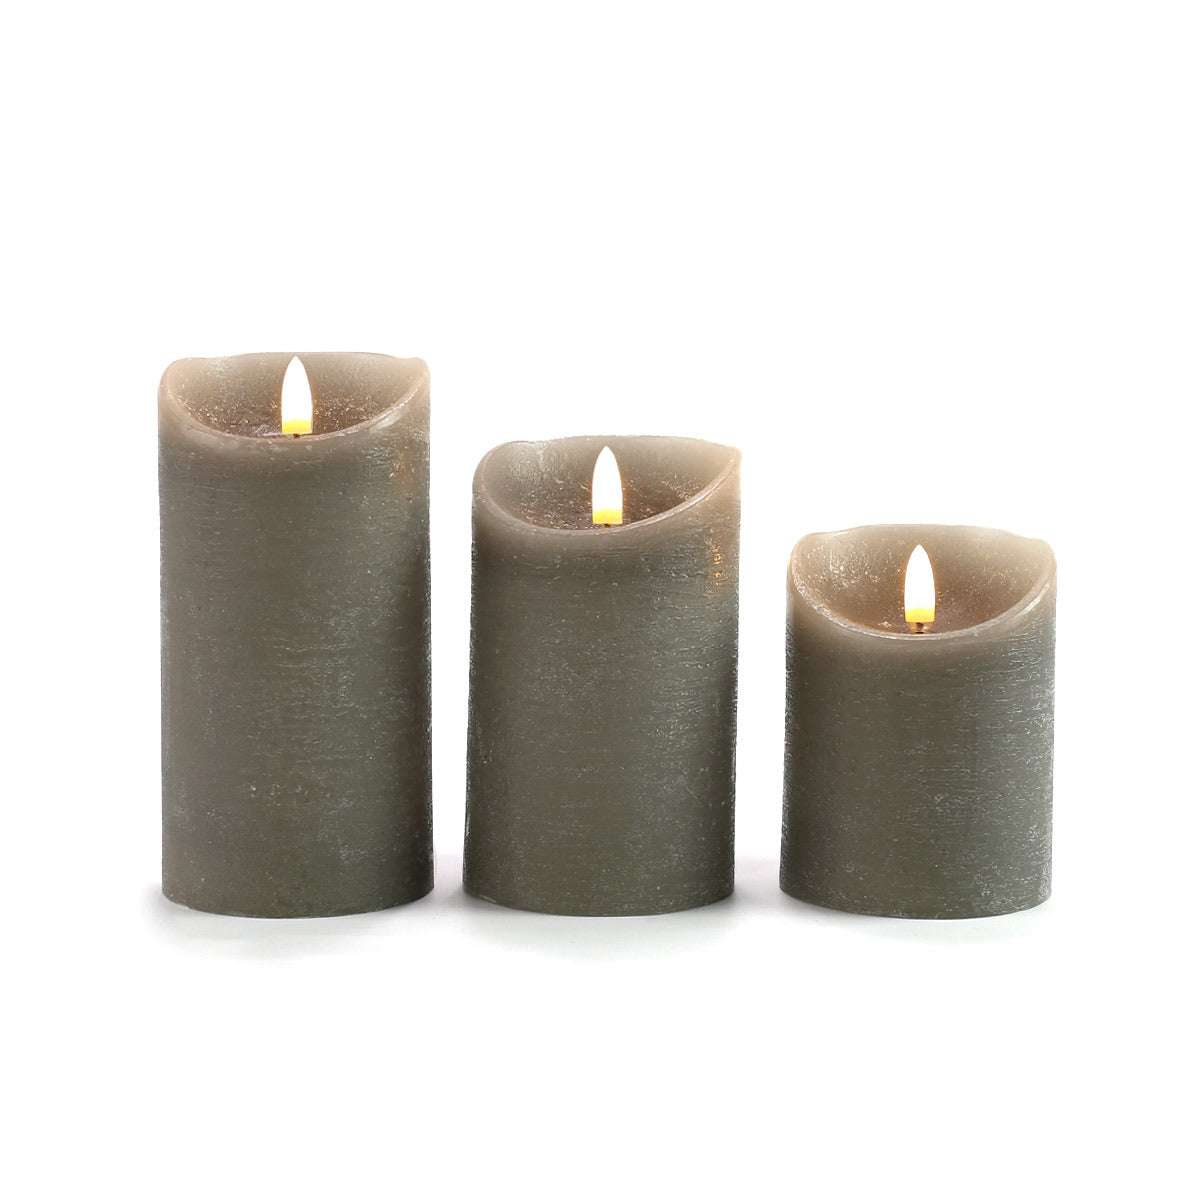 Set of 3 Fantastically realistic faux candles!